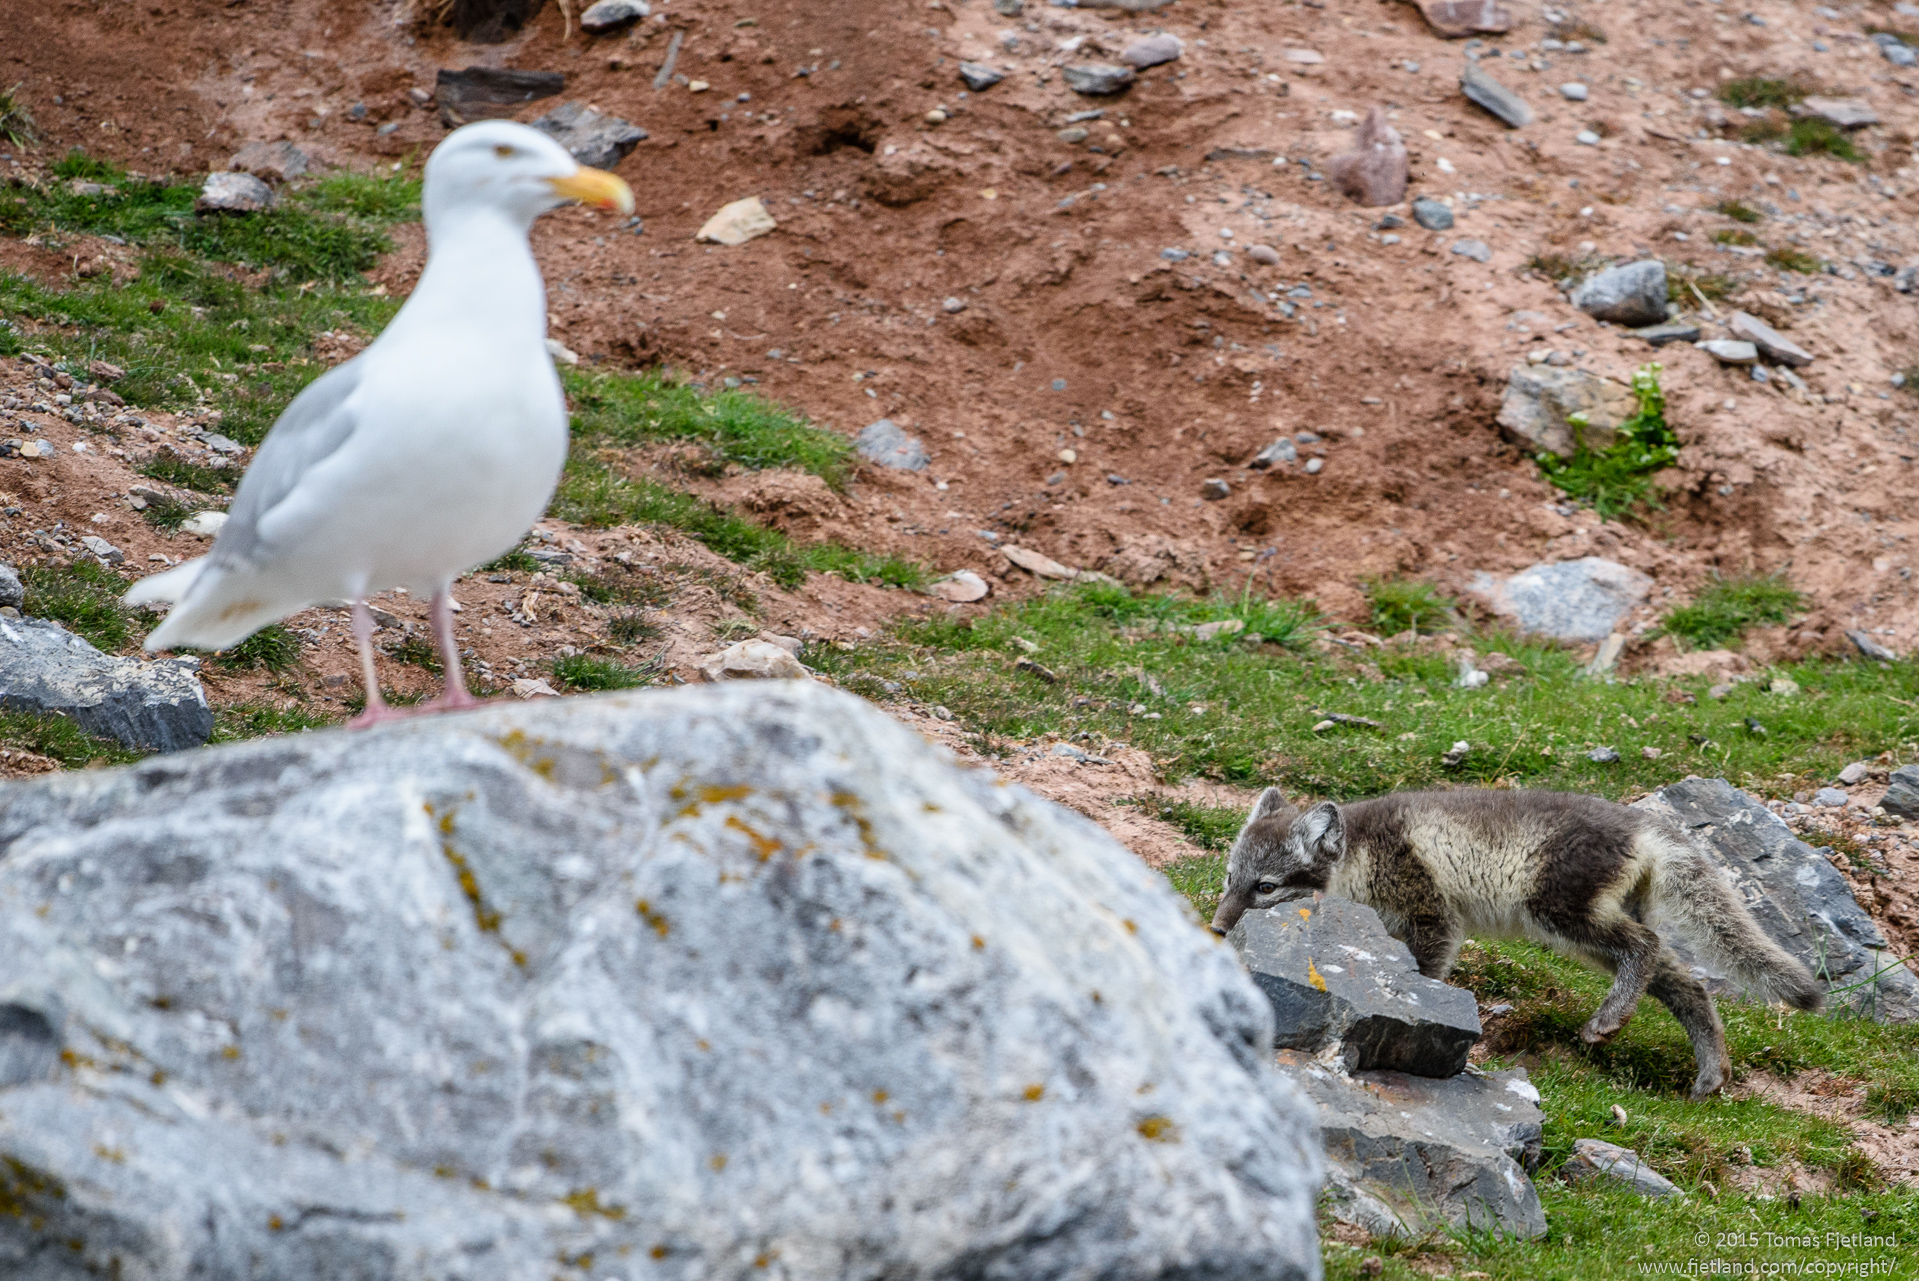 Arctic fox cub sneaking up on a large Glauceous gull